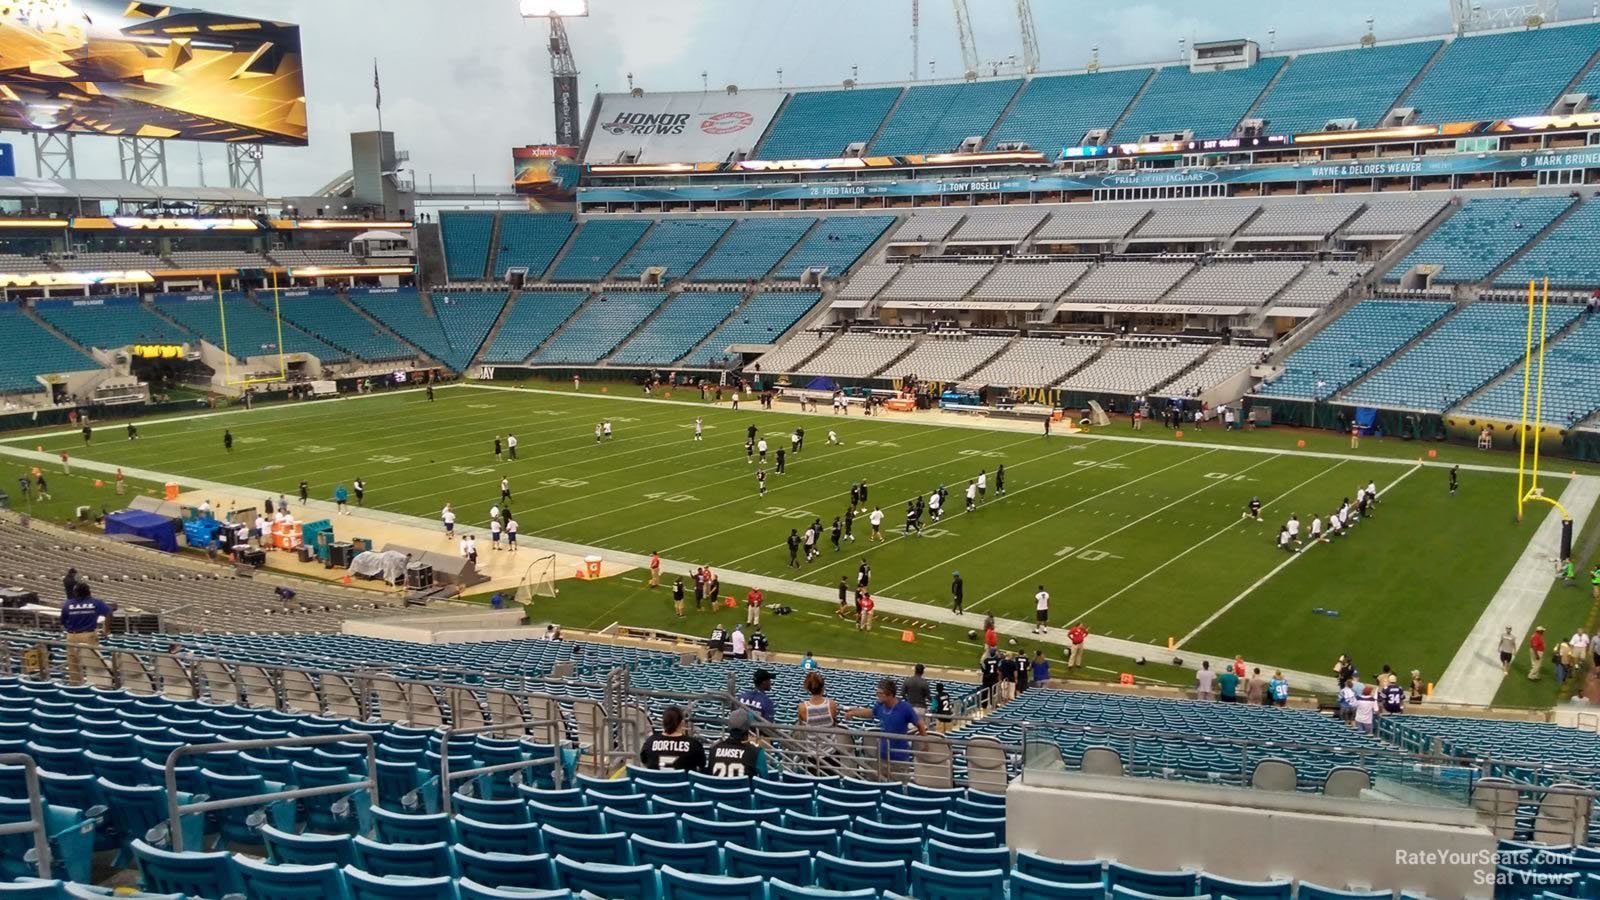 section 231, row q seat view  - tiaa bank field